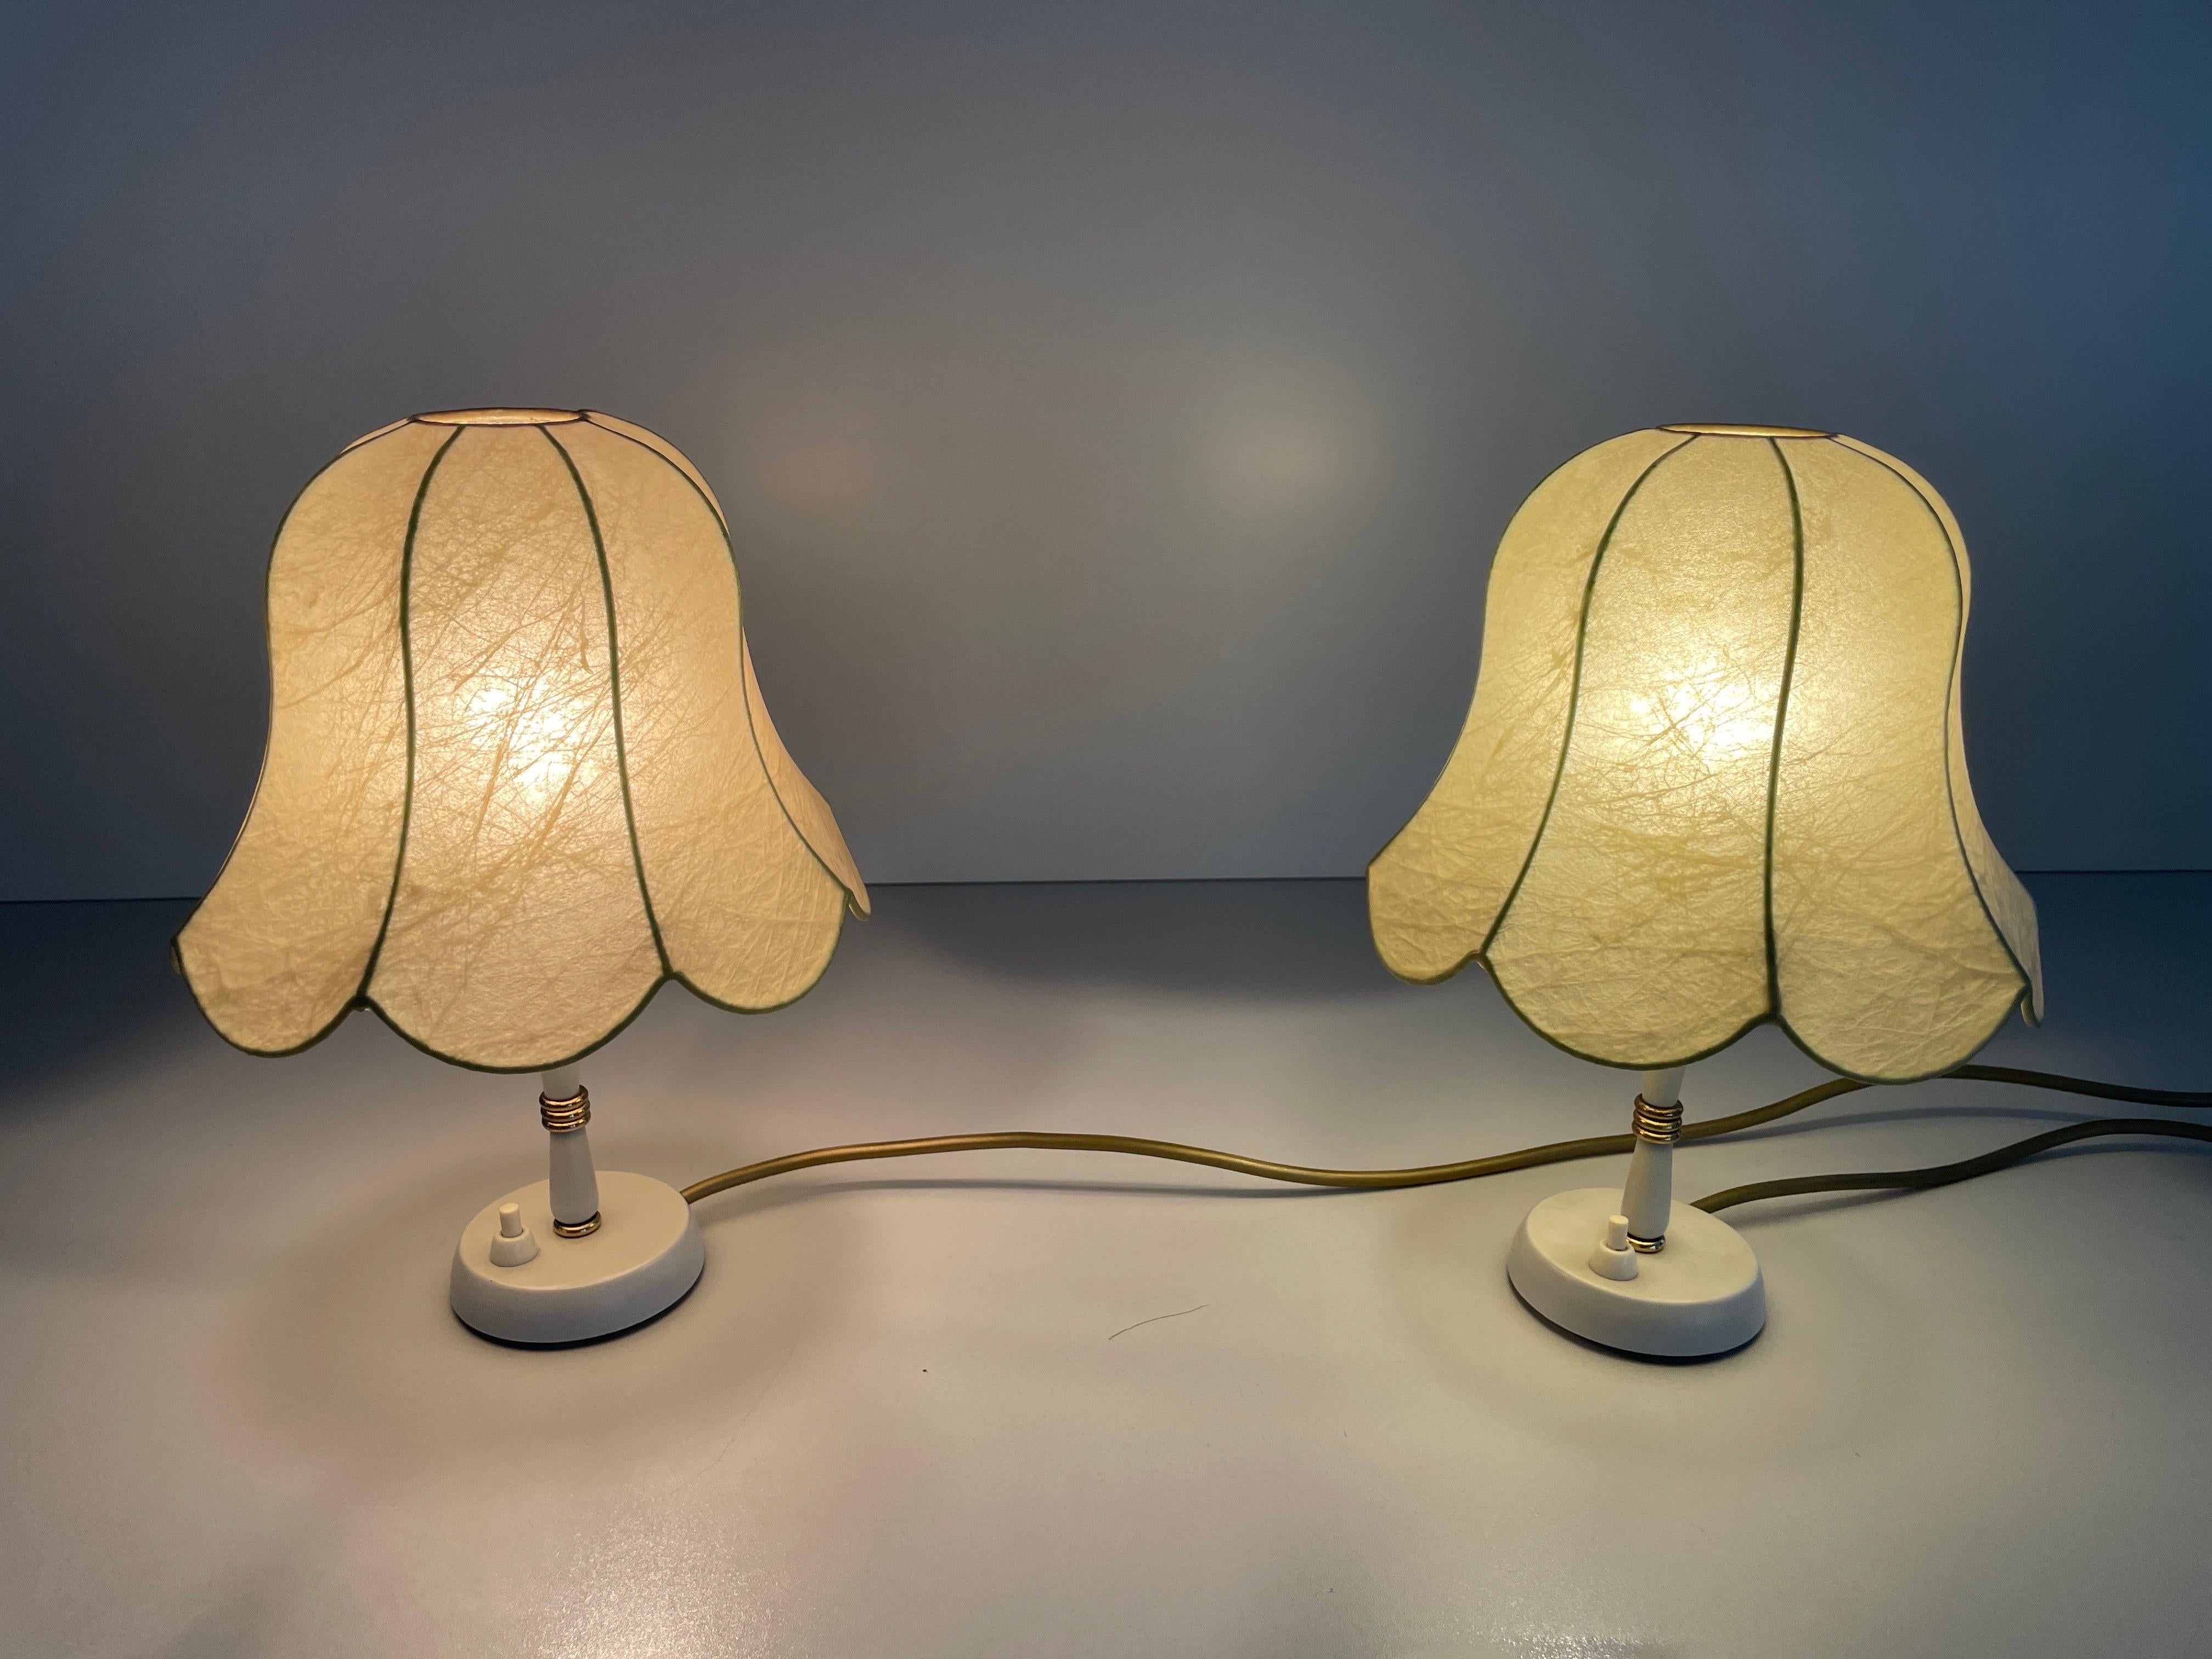 Cocoon Shade Metal Body Pair of Bedside Lamps by GOLDKANT, 1970s, Germany For Sale 7